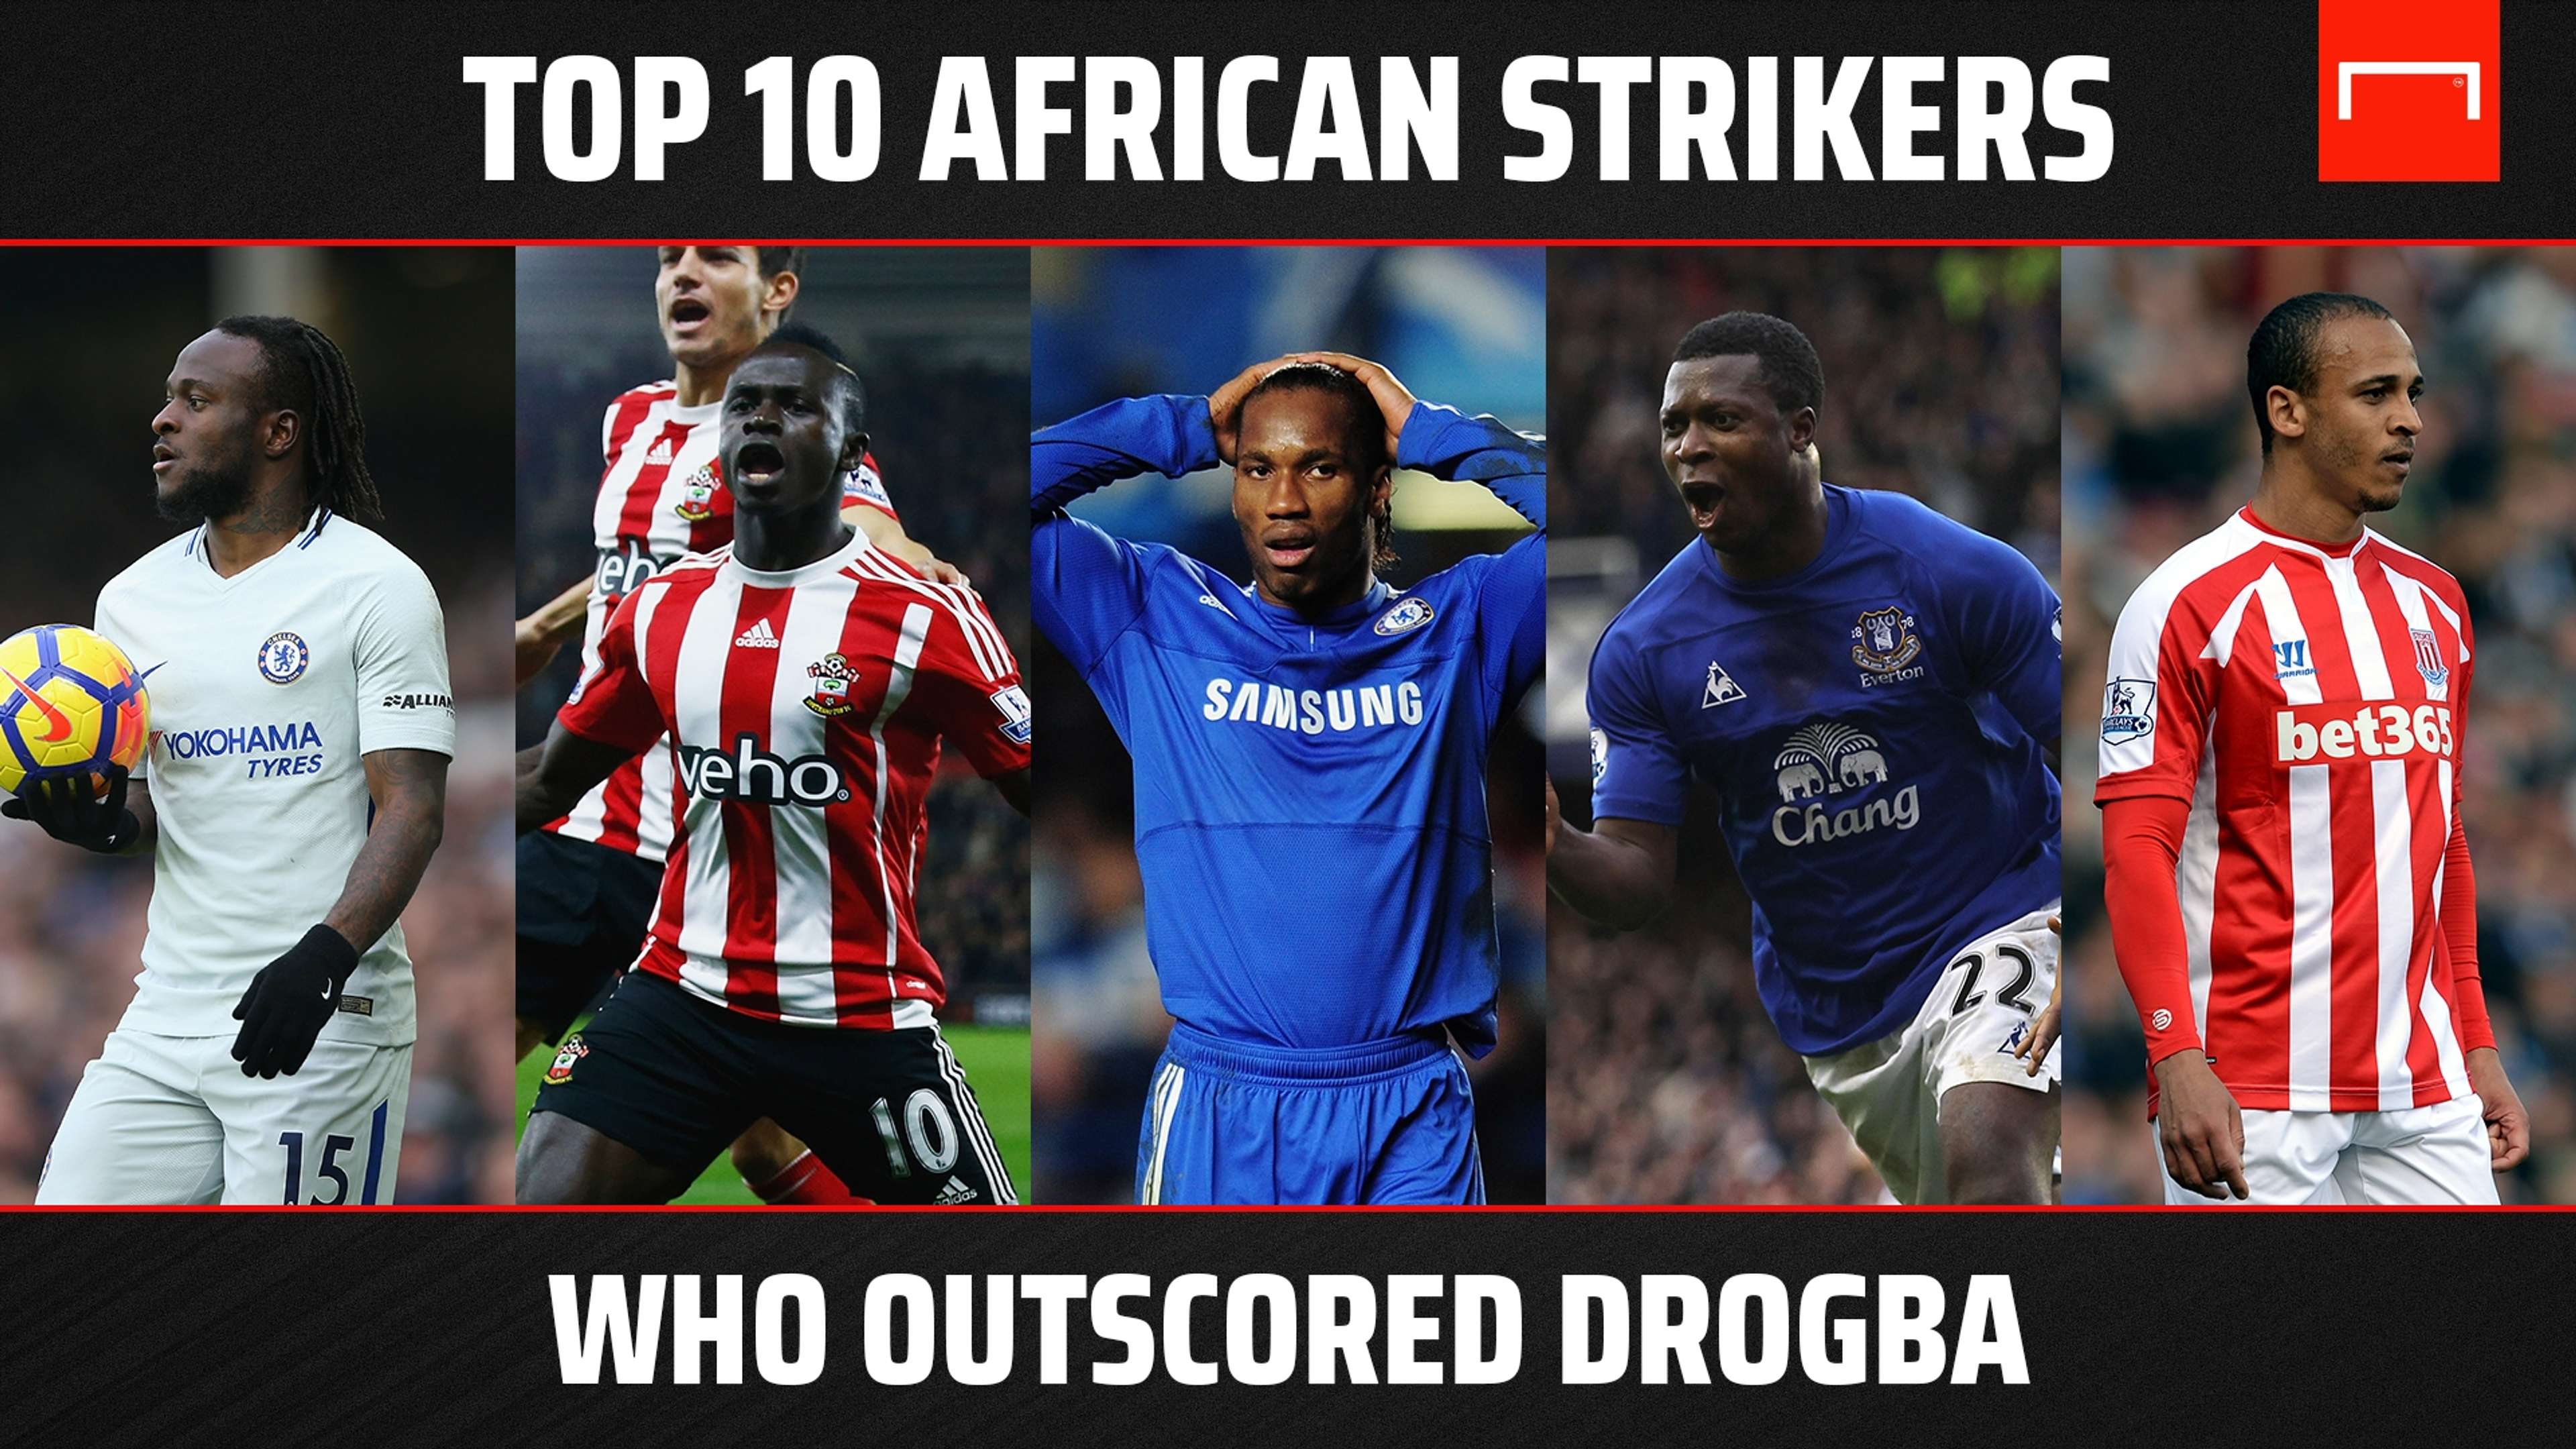 African strikers who outscored Drogba